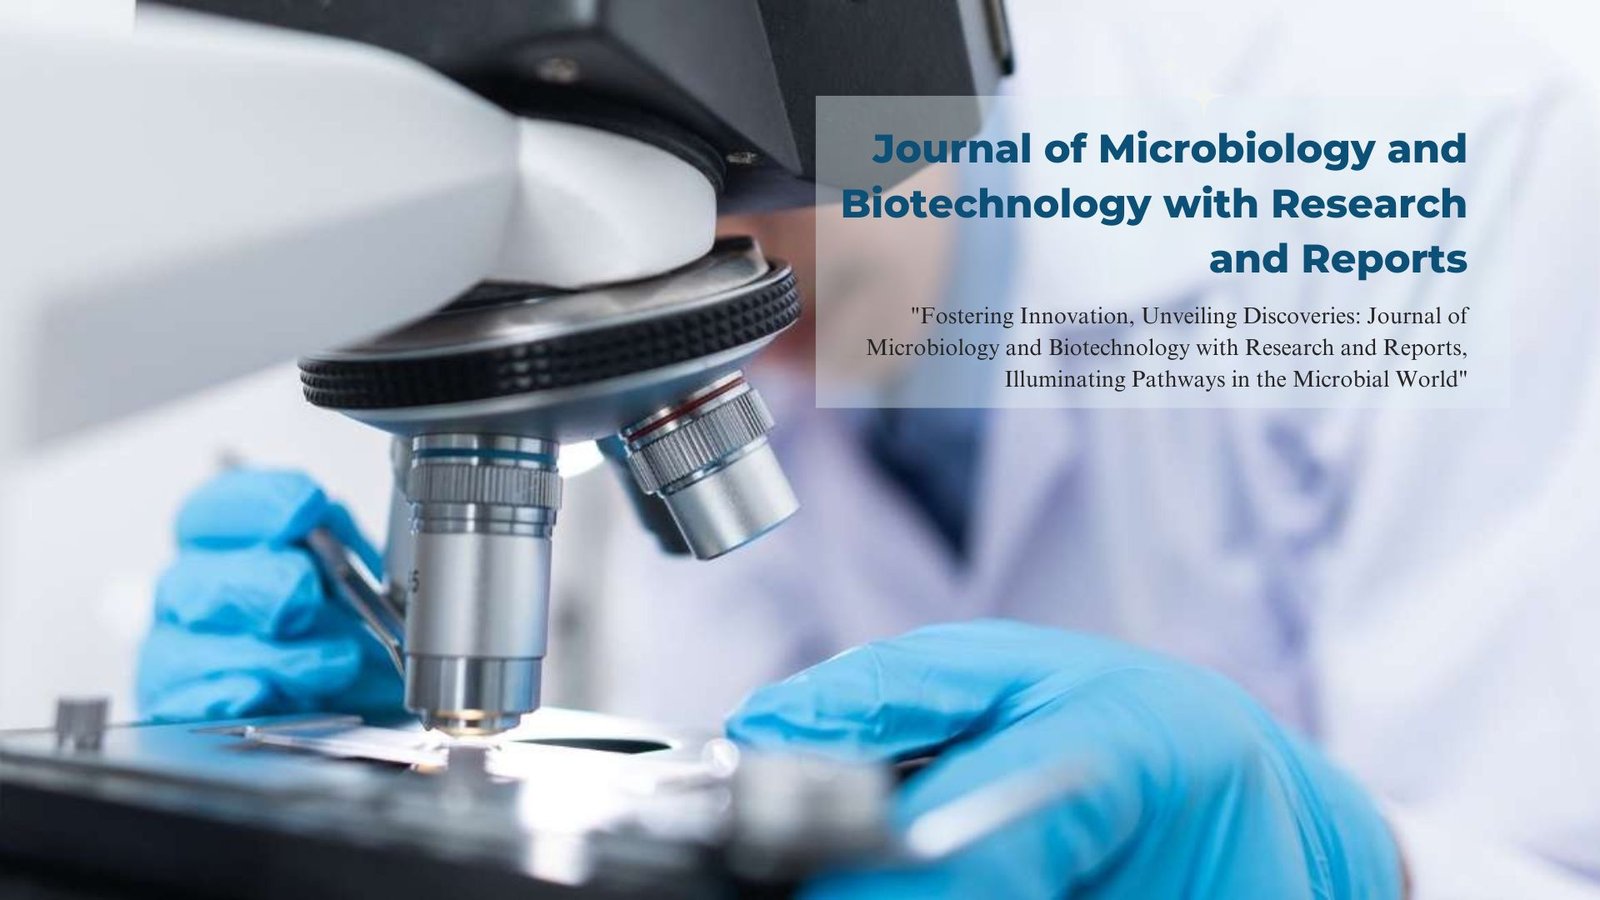 Journal of Microbiology and Biotechnology with Research and Reports